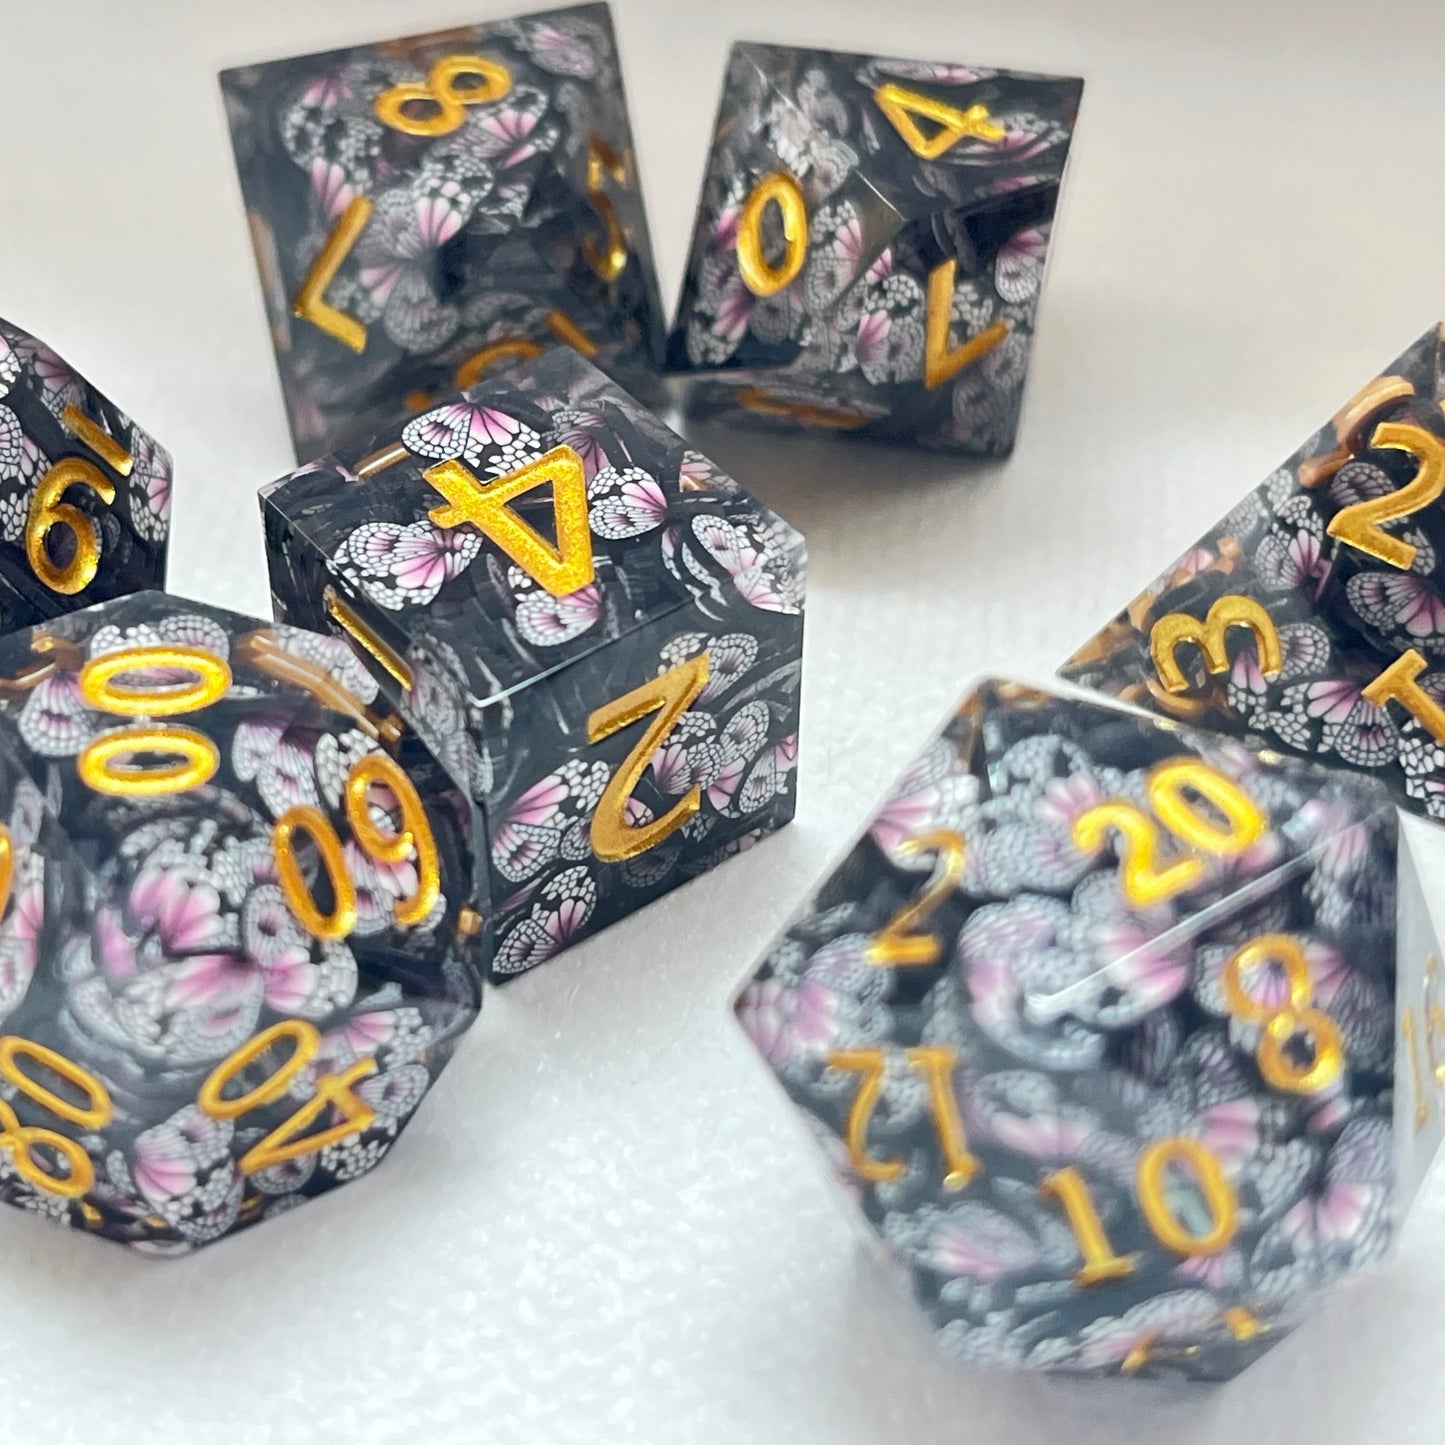 butterfly dnd TTRPG dice set for role playing games, dice goblin collectors